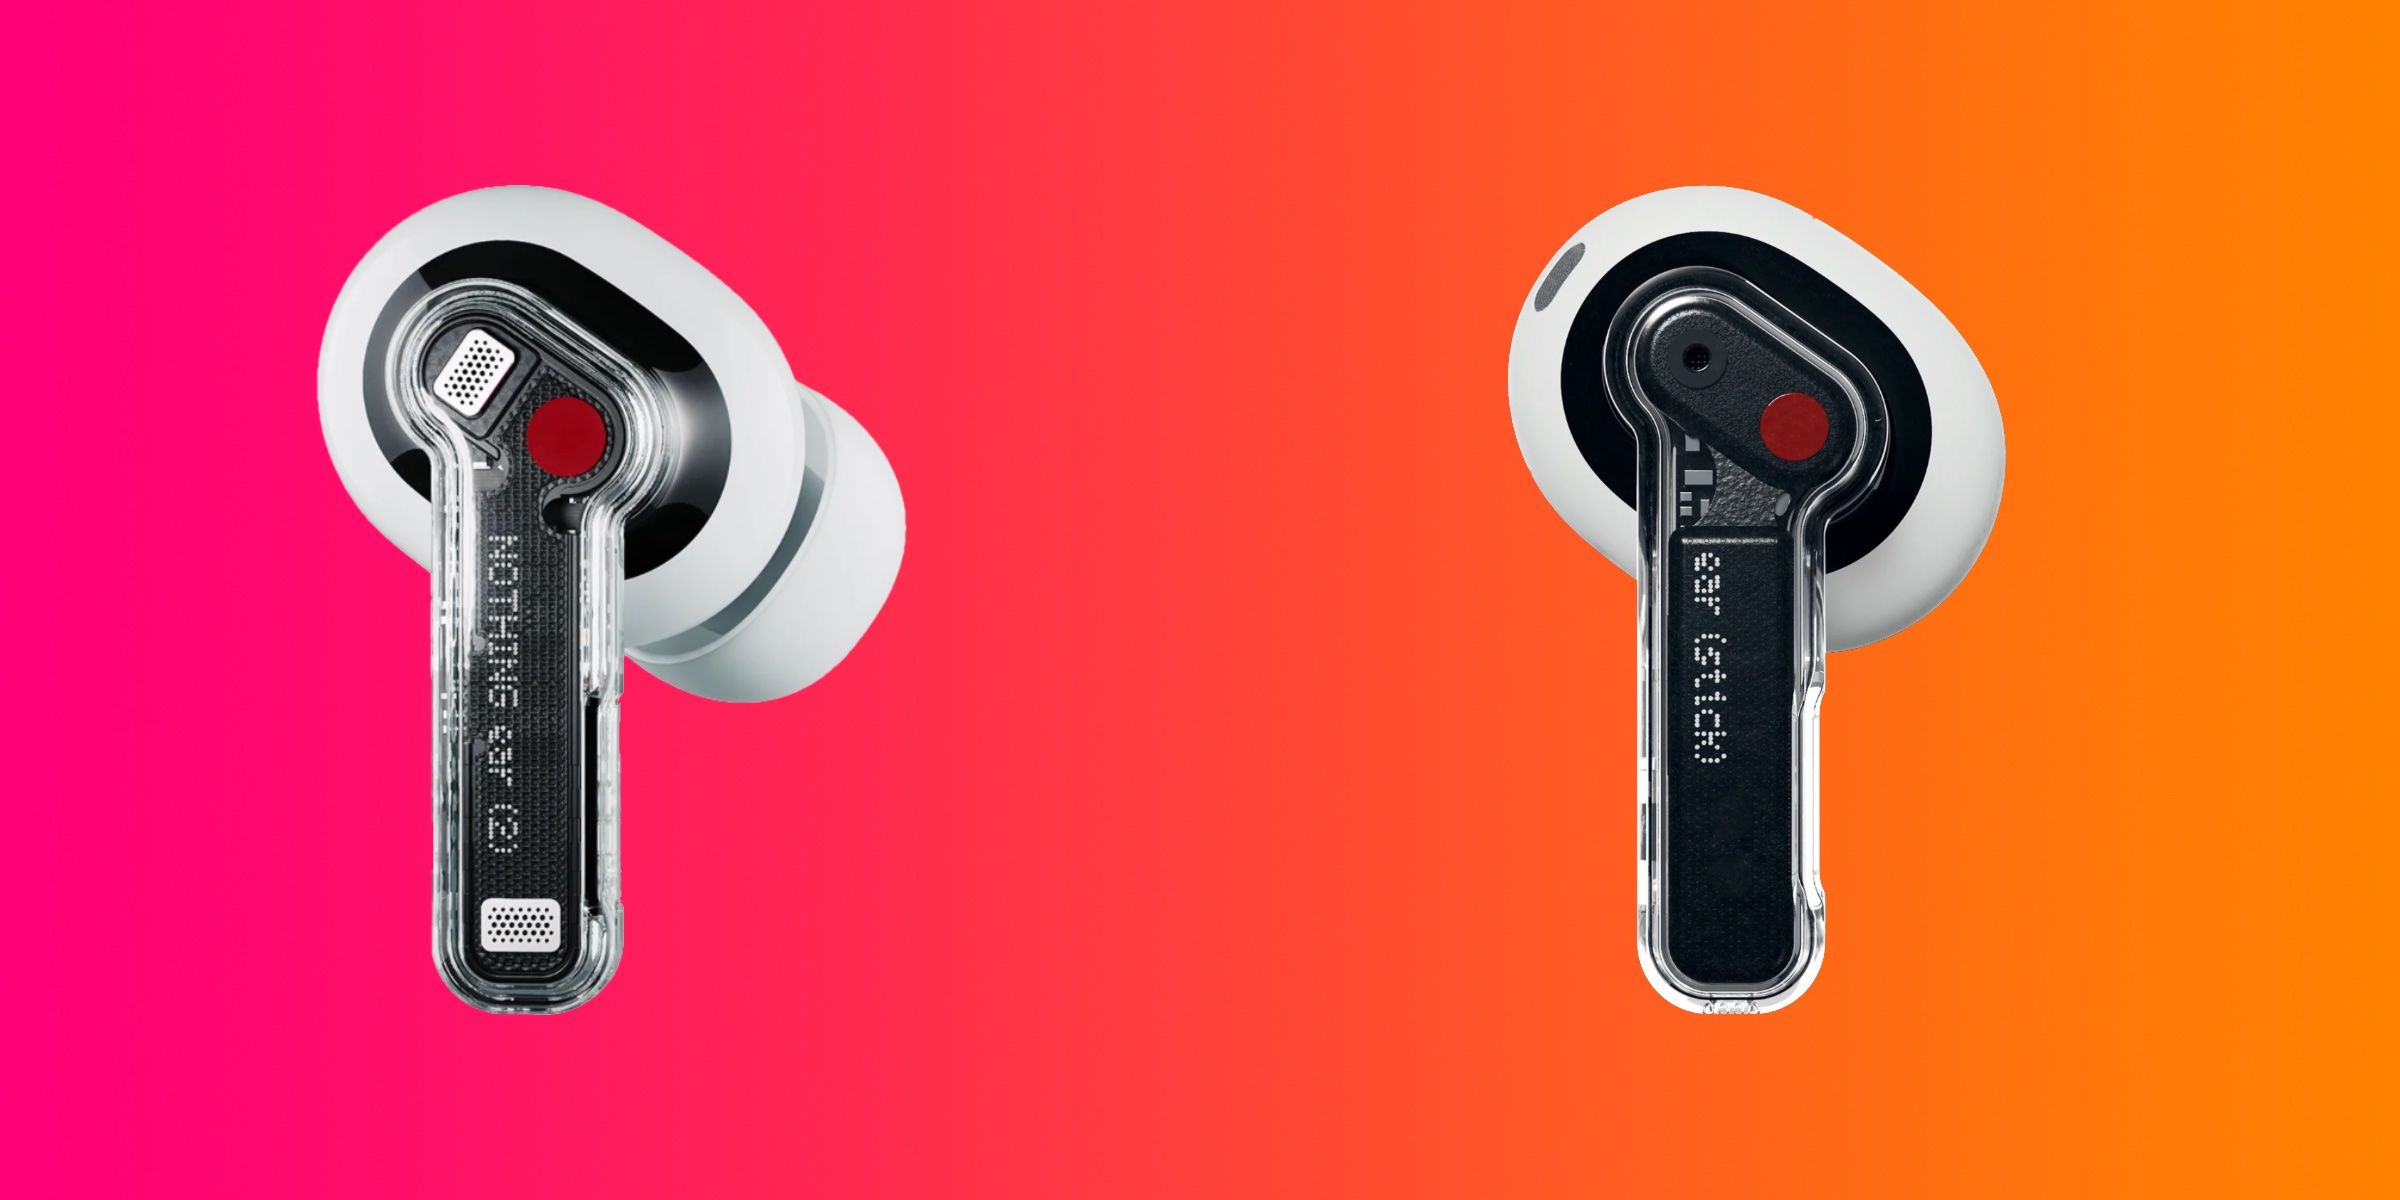 Nothing Ear (Stick) Vs. Nothing Ear (2): Should You Spend $99 Or $149?